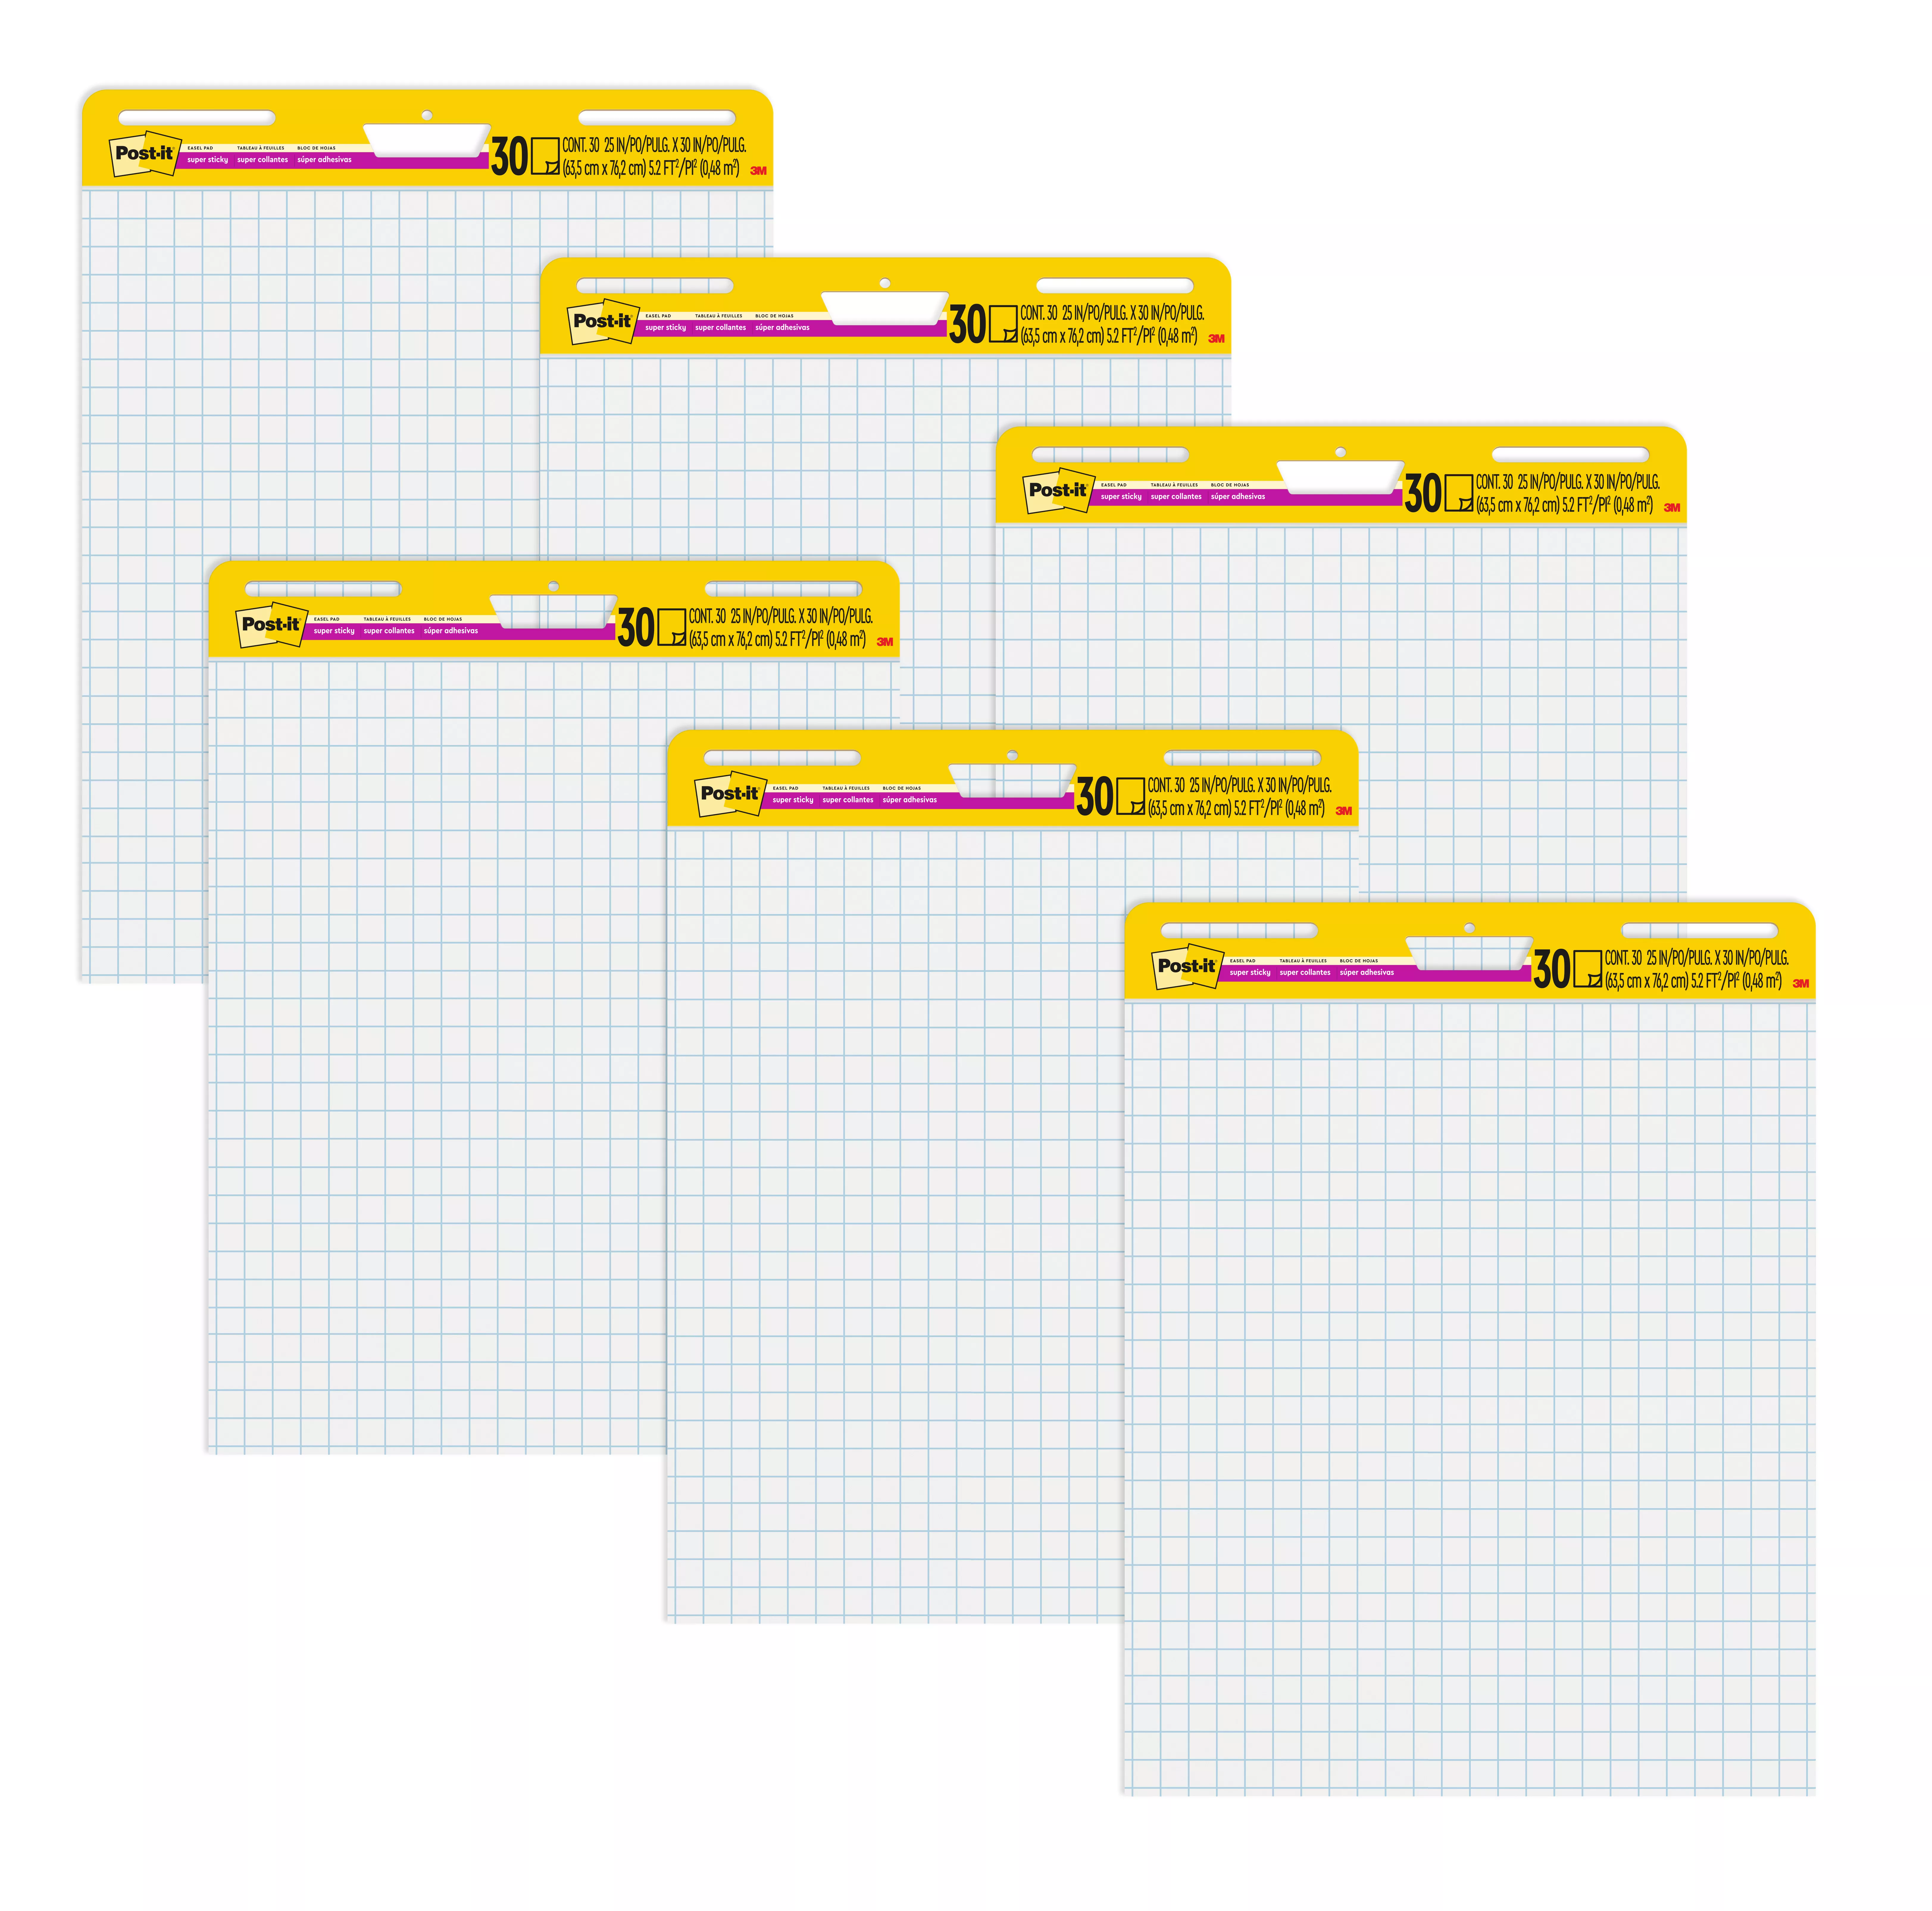 Post-it® Super Sticky Easel Pad, 560 VAD 6PK, 25 in x 30 in (63.5 cm x
76.2 cm), 6/pack